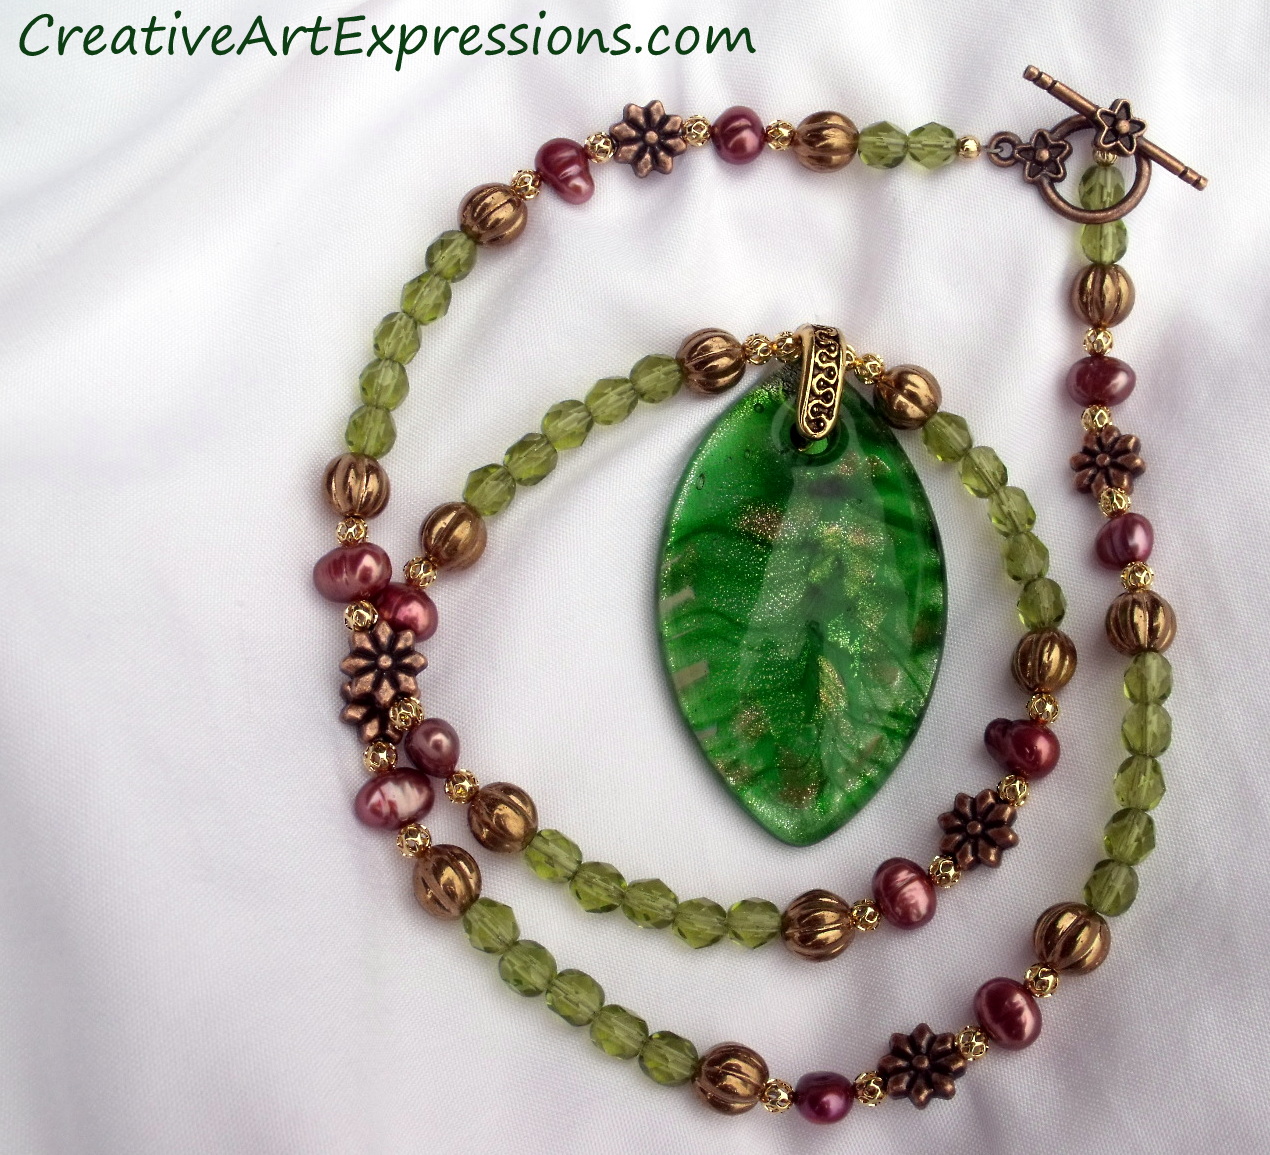 Creative Art Expressions Handmade Green Leaf Necklace Jewelry Design 